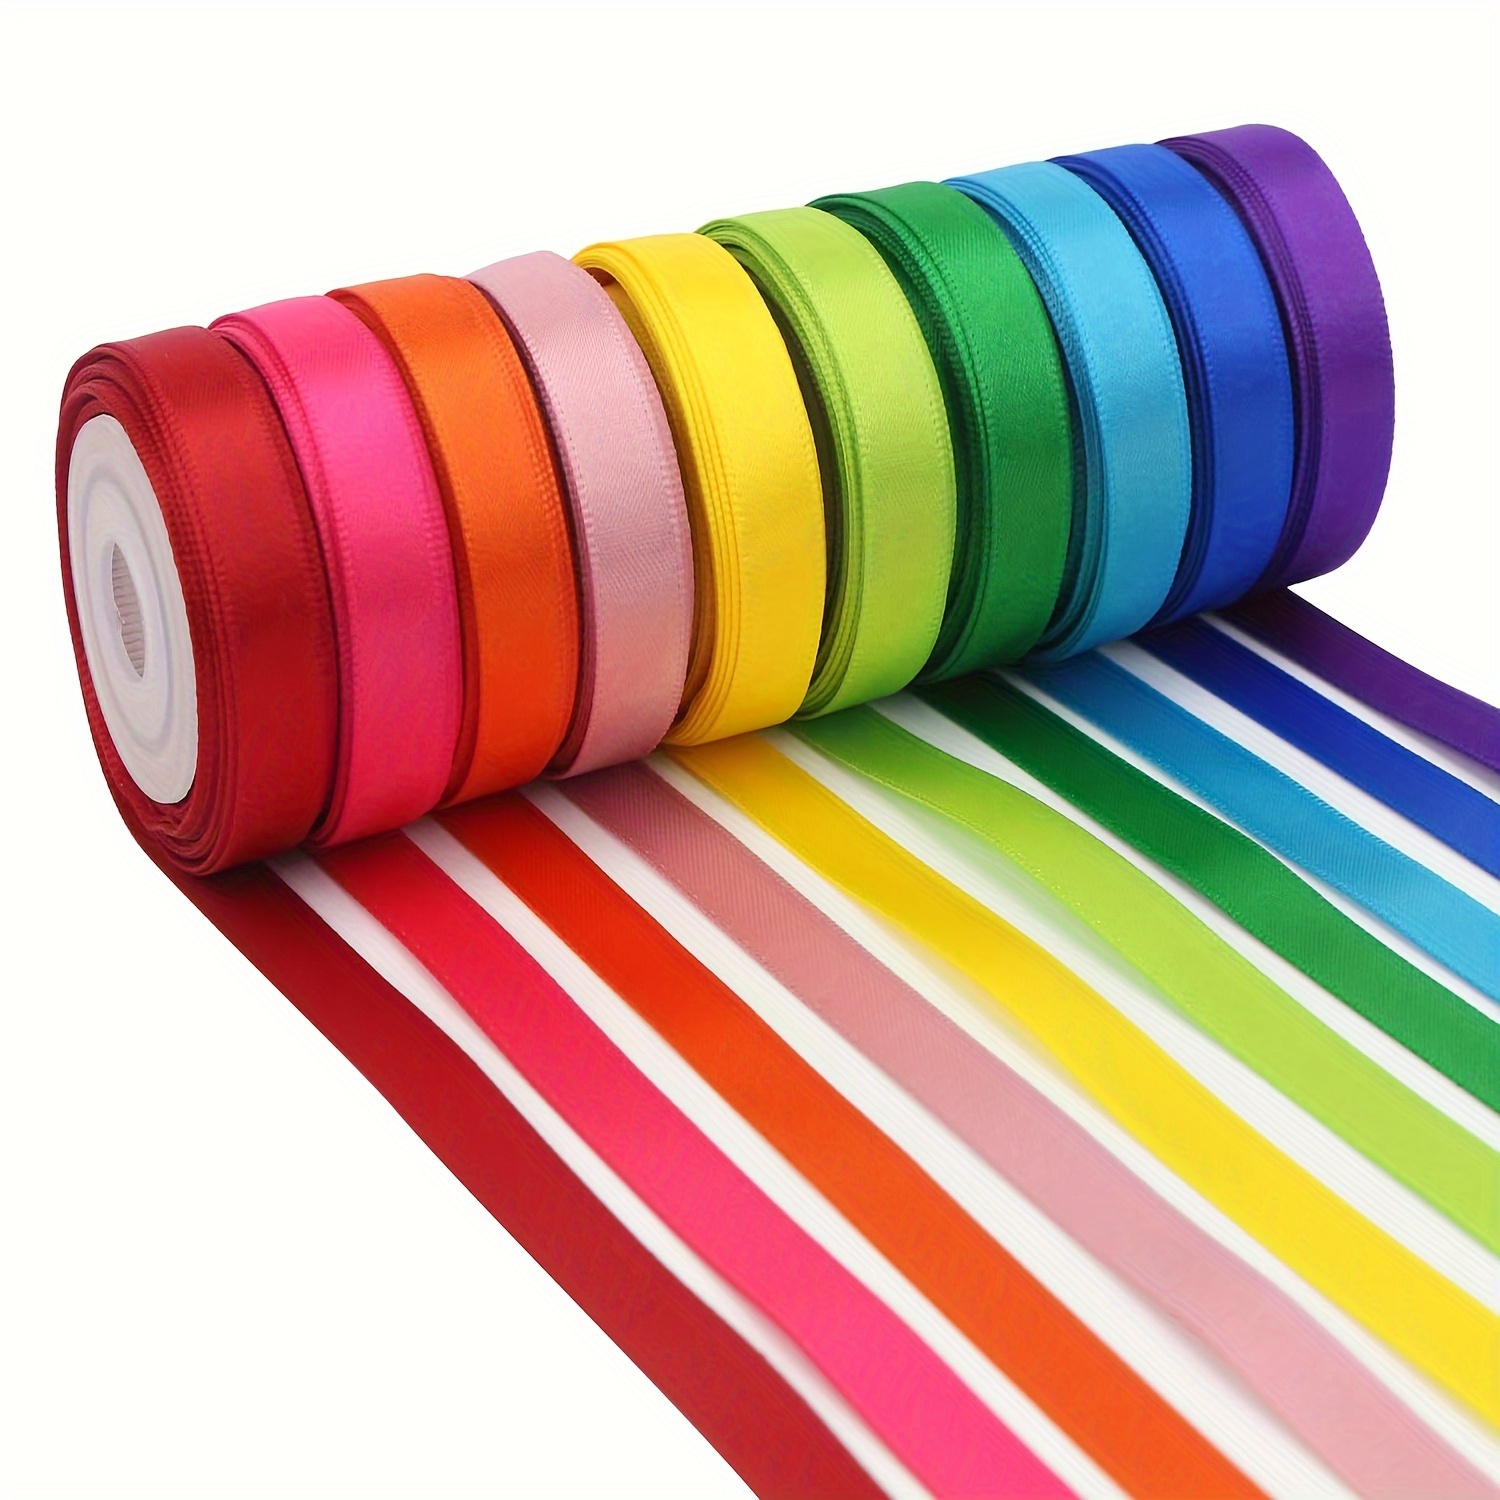 

Rainbow Satin Ribbon Set - 3/8" X 25 Yards, Solid Colors For Gift Wrapping, Birthday & Wedding Decorations